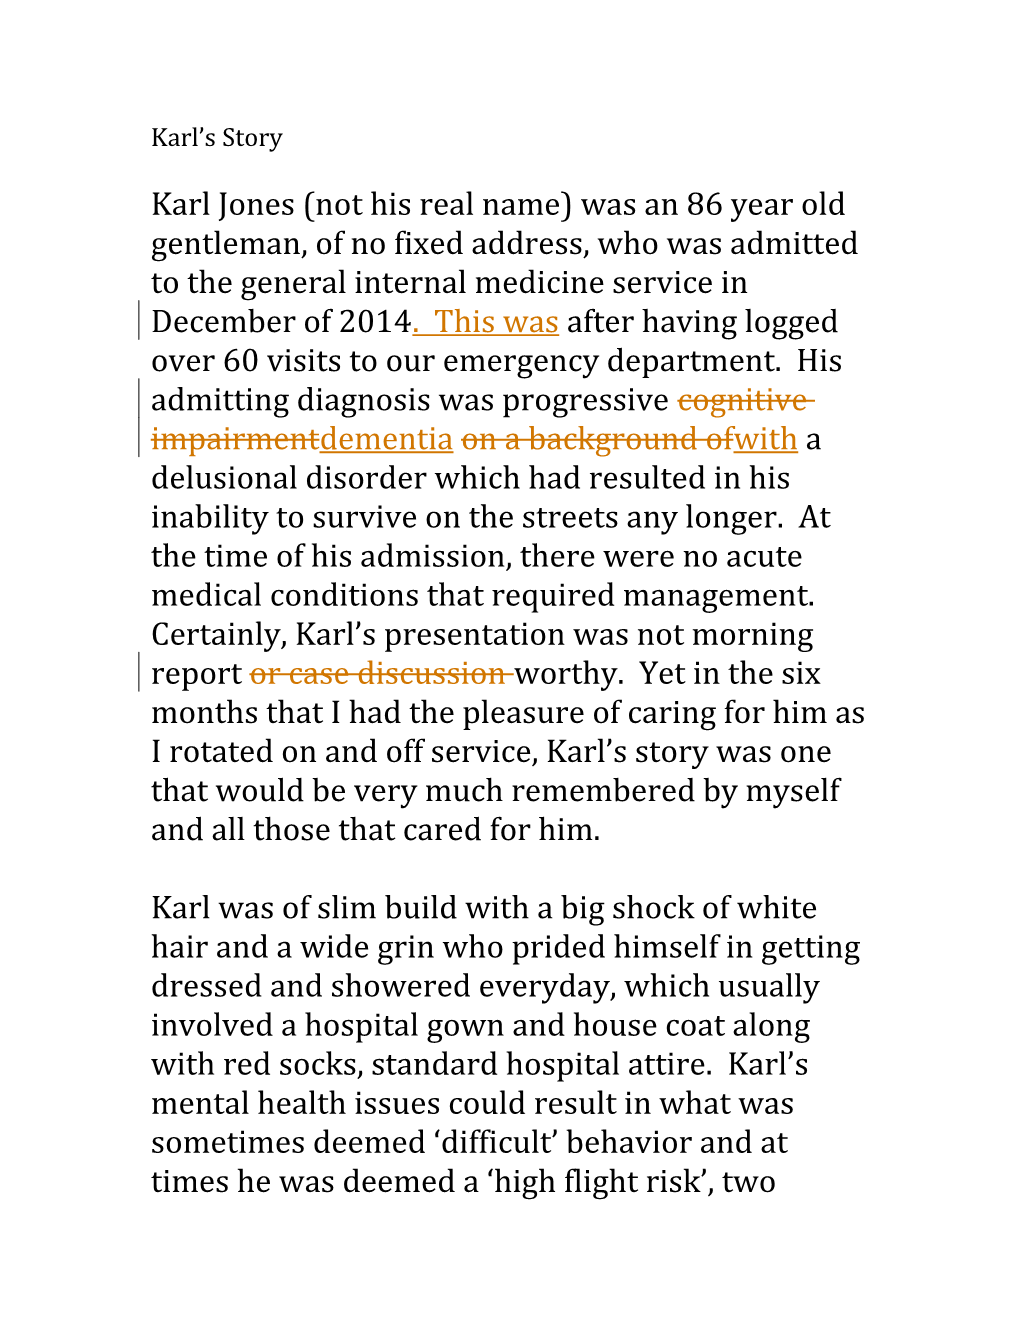 Karl Was of Slim Build with a Big Shock of White Hair and a Wide Grin Who Prided Himself